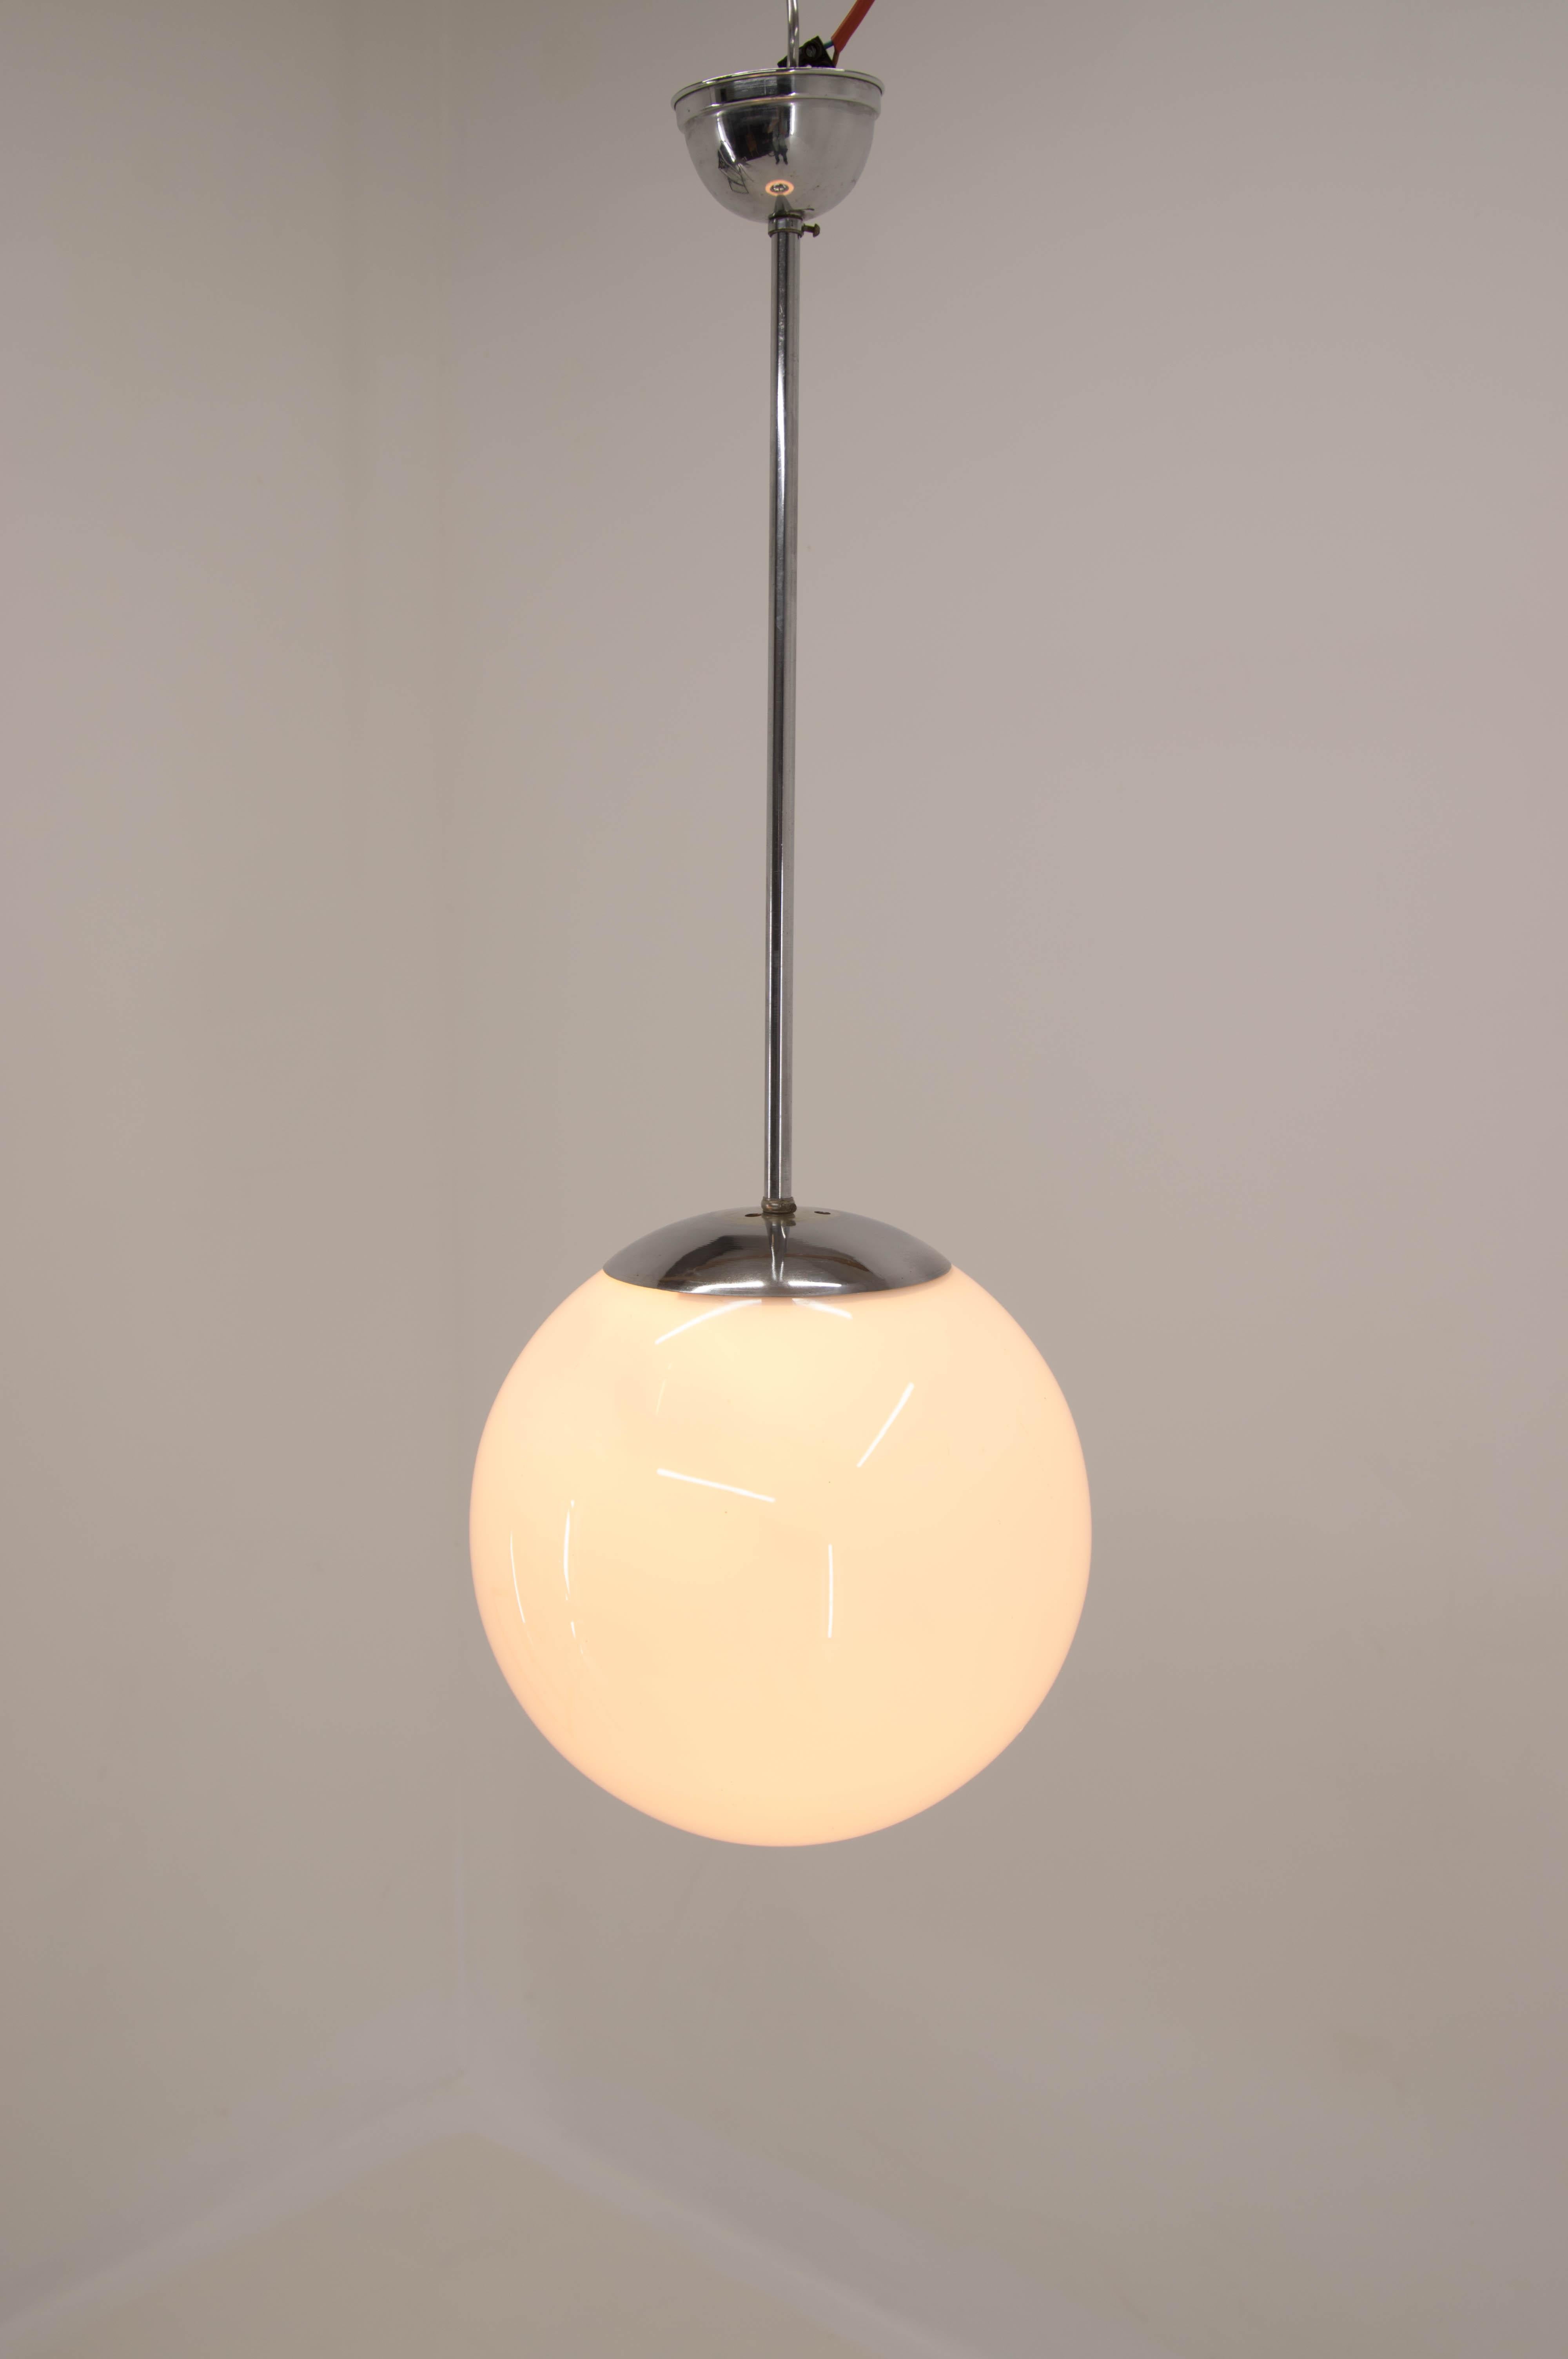 Mid-20th Century Chrome-Plated Bauhaus Minimalistic Chandelier by Franta Anyz, Type 5878, 1930s For Sale